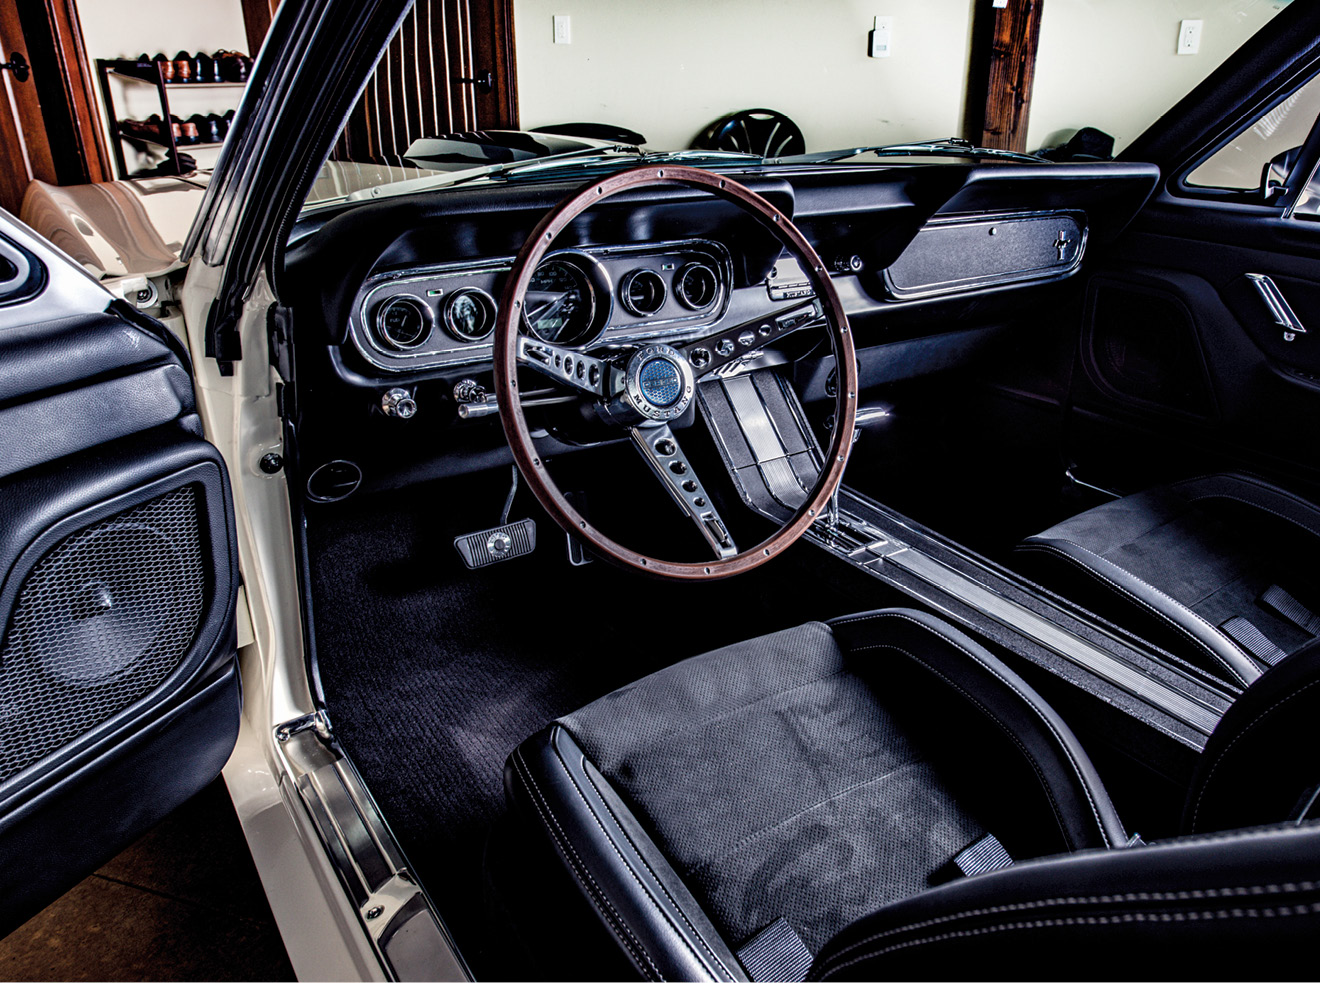 ’66 Ford Mustang Fastback interior- wheel view